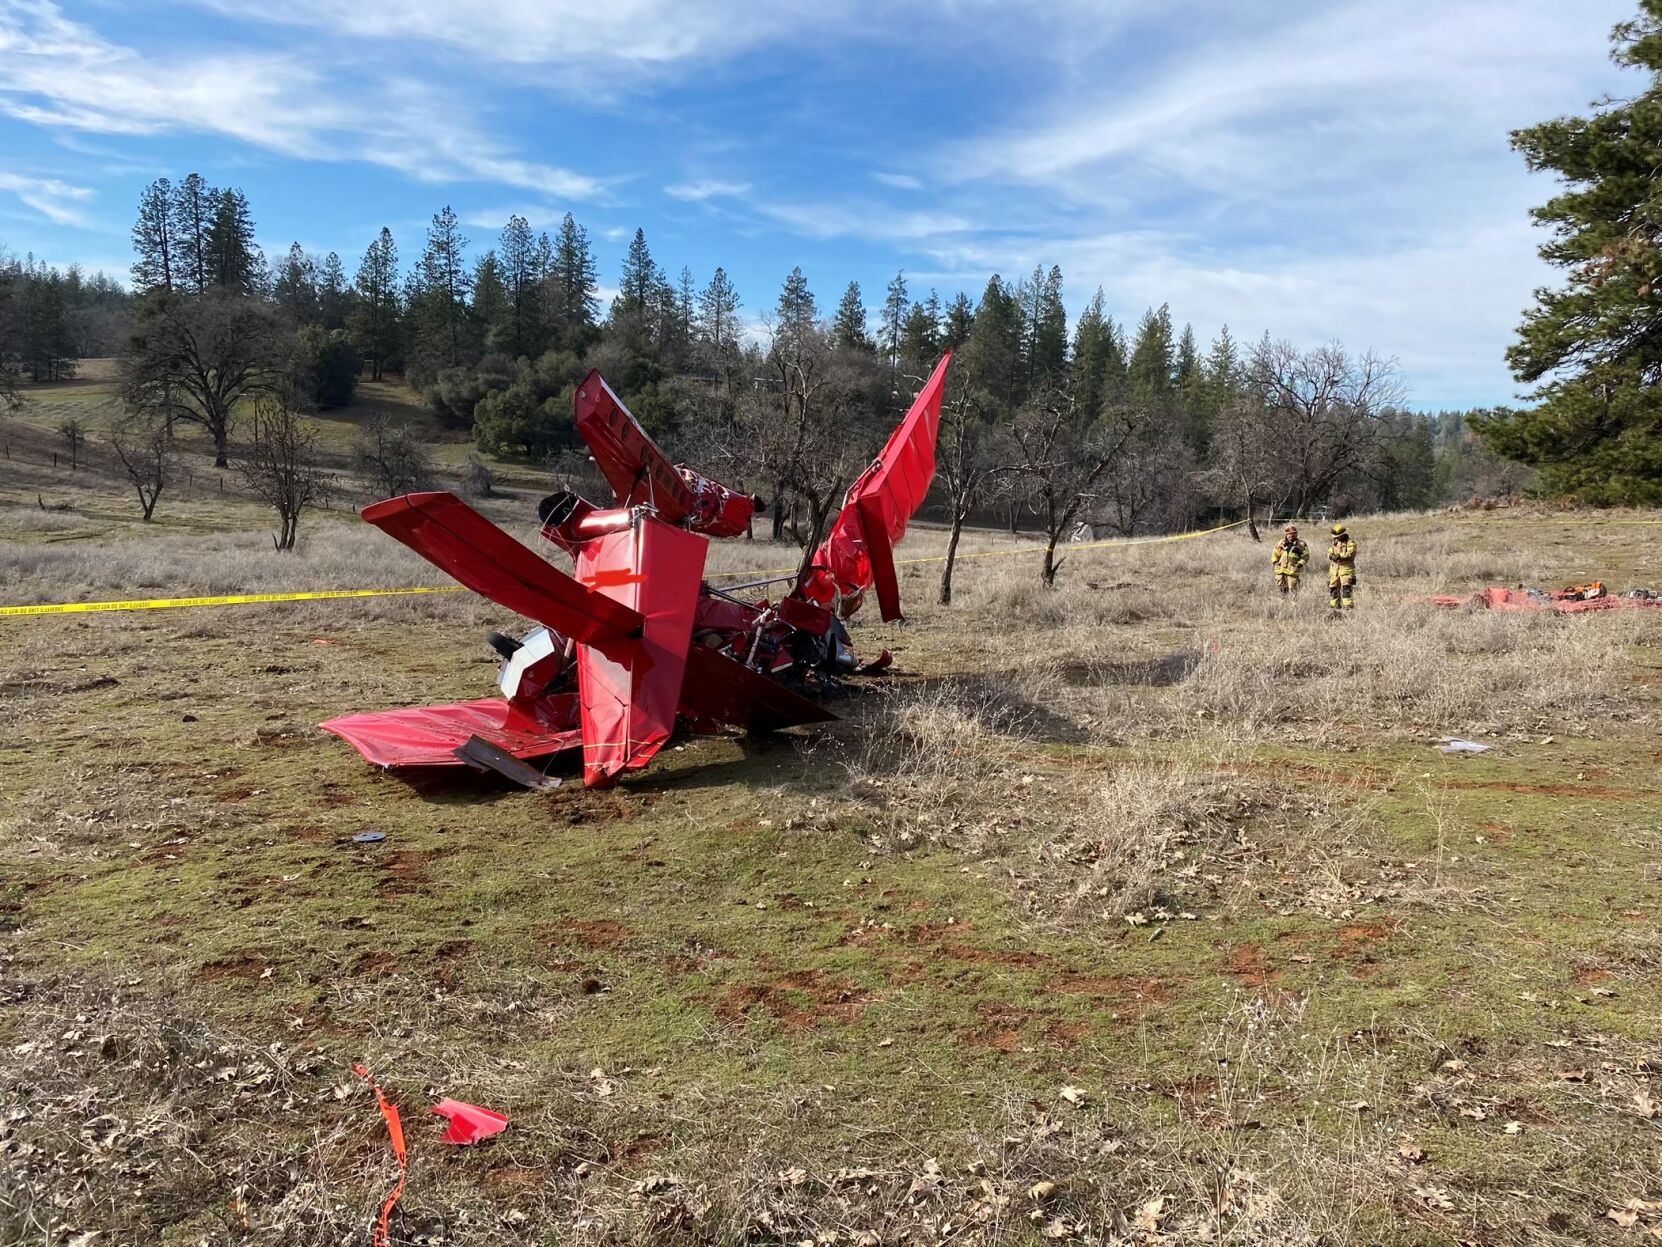 NTSB release preliminary report on deadly plane crash near Colfax News 2news pic